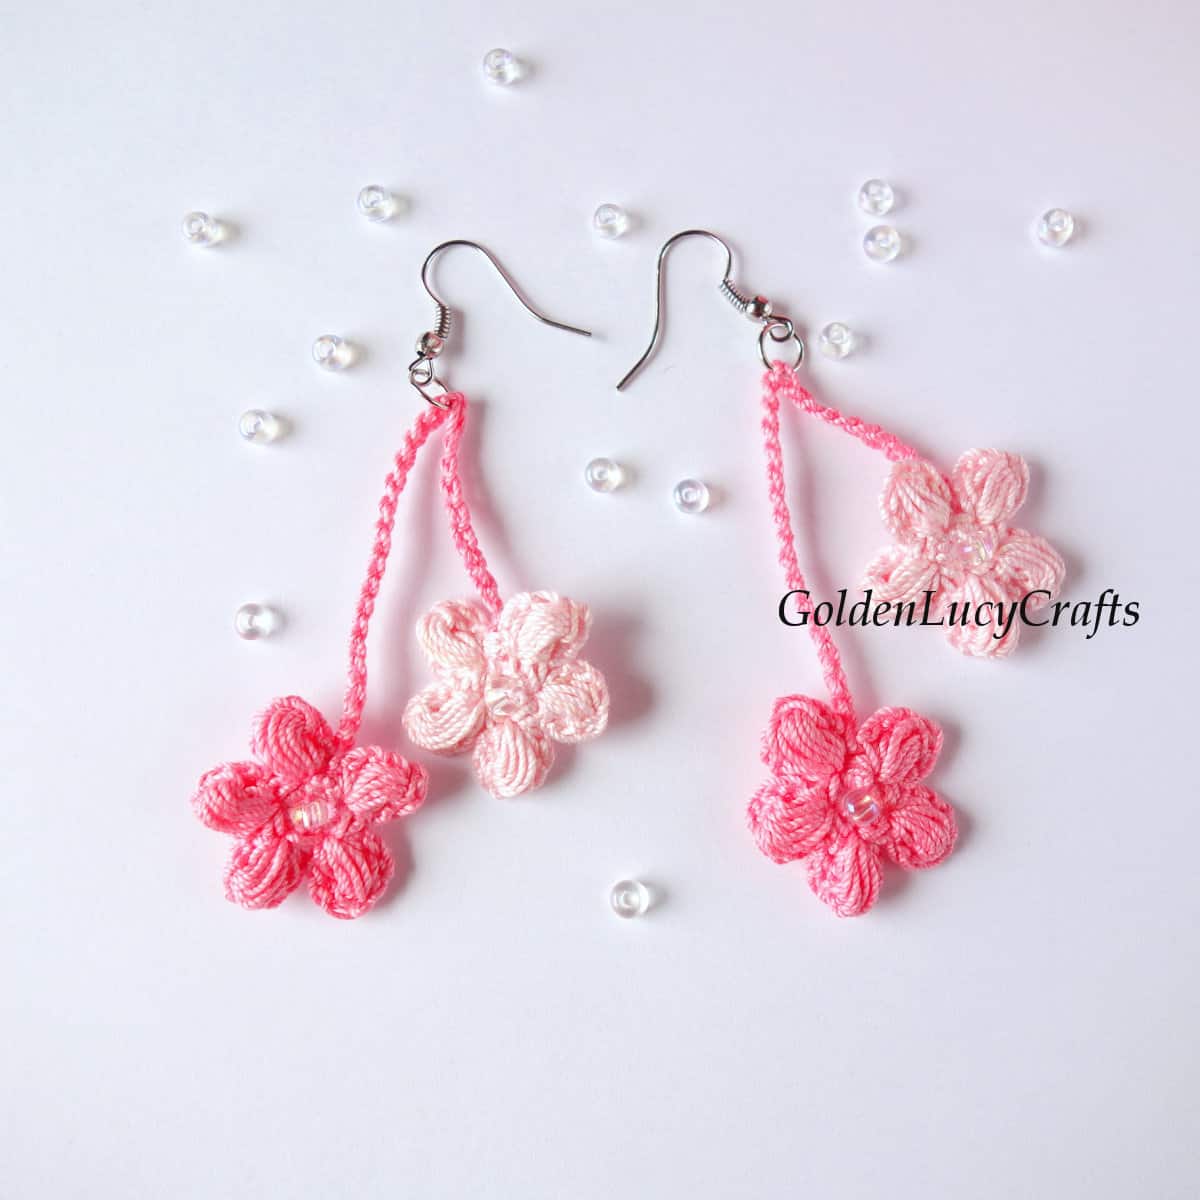 Crochet cherry blossom earrings in pink colors.